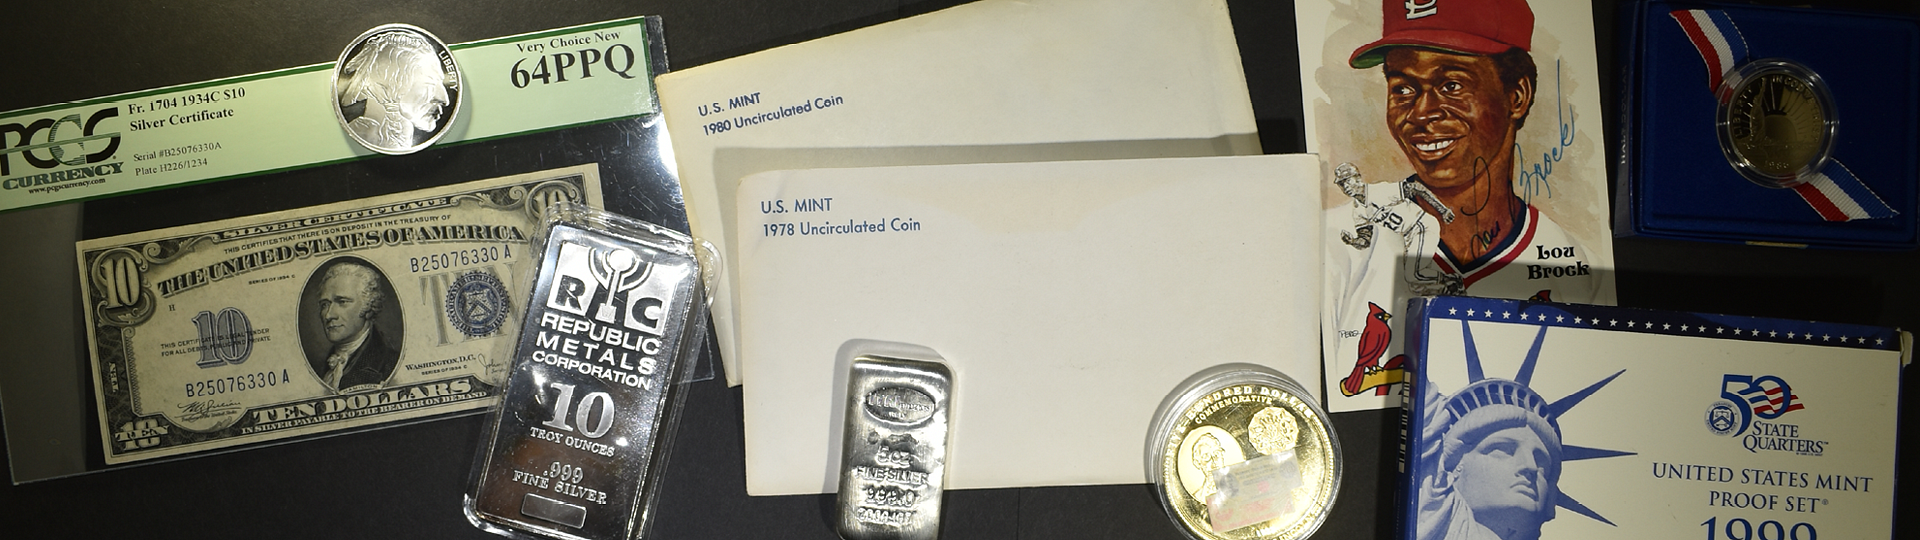 April 11th Silver City Rare Coins & Sports by Silver City Auctions